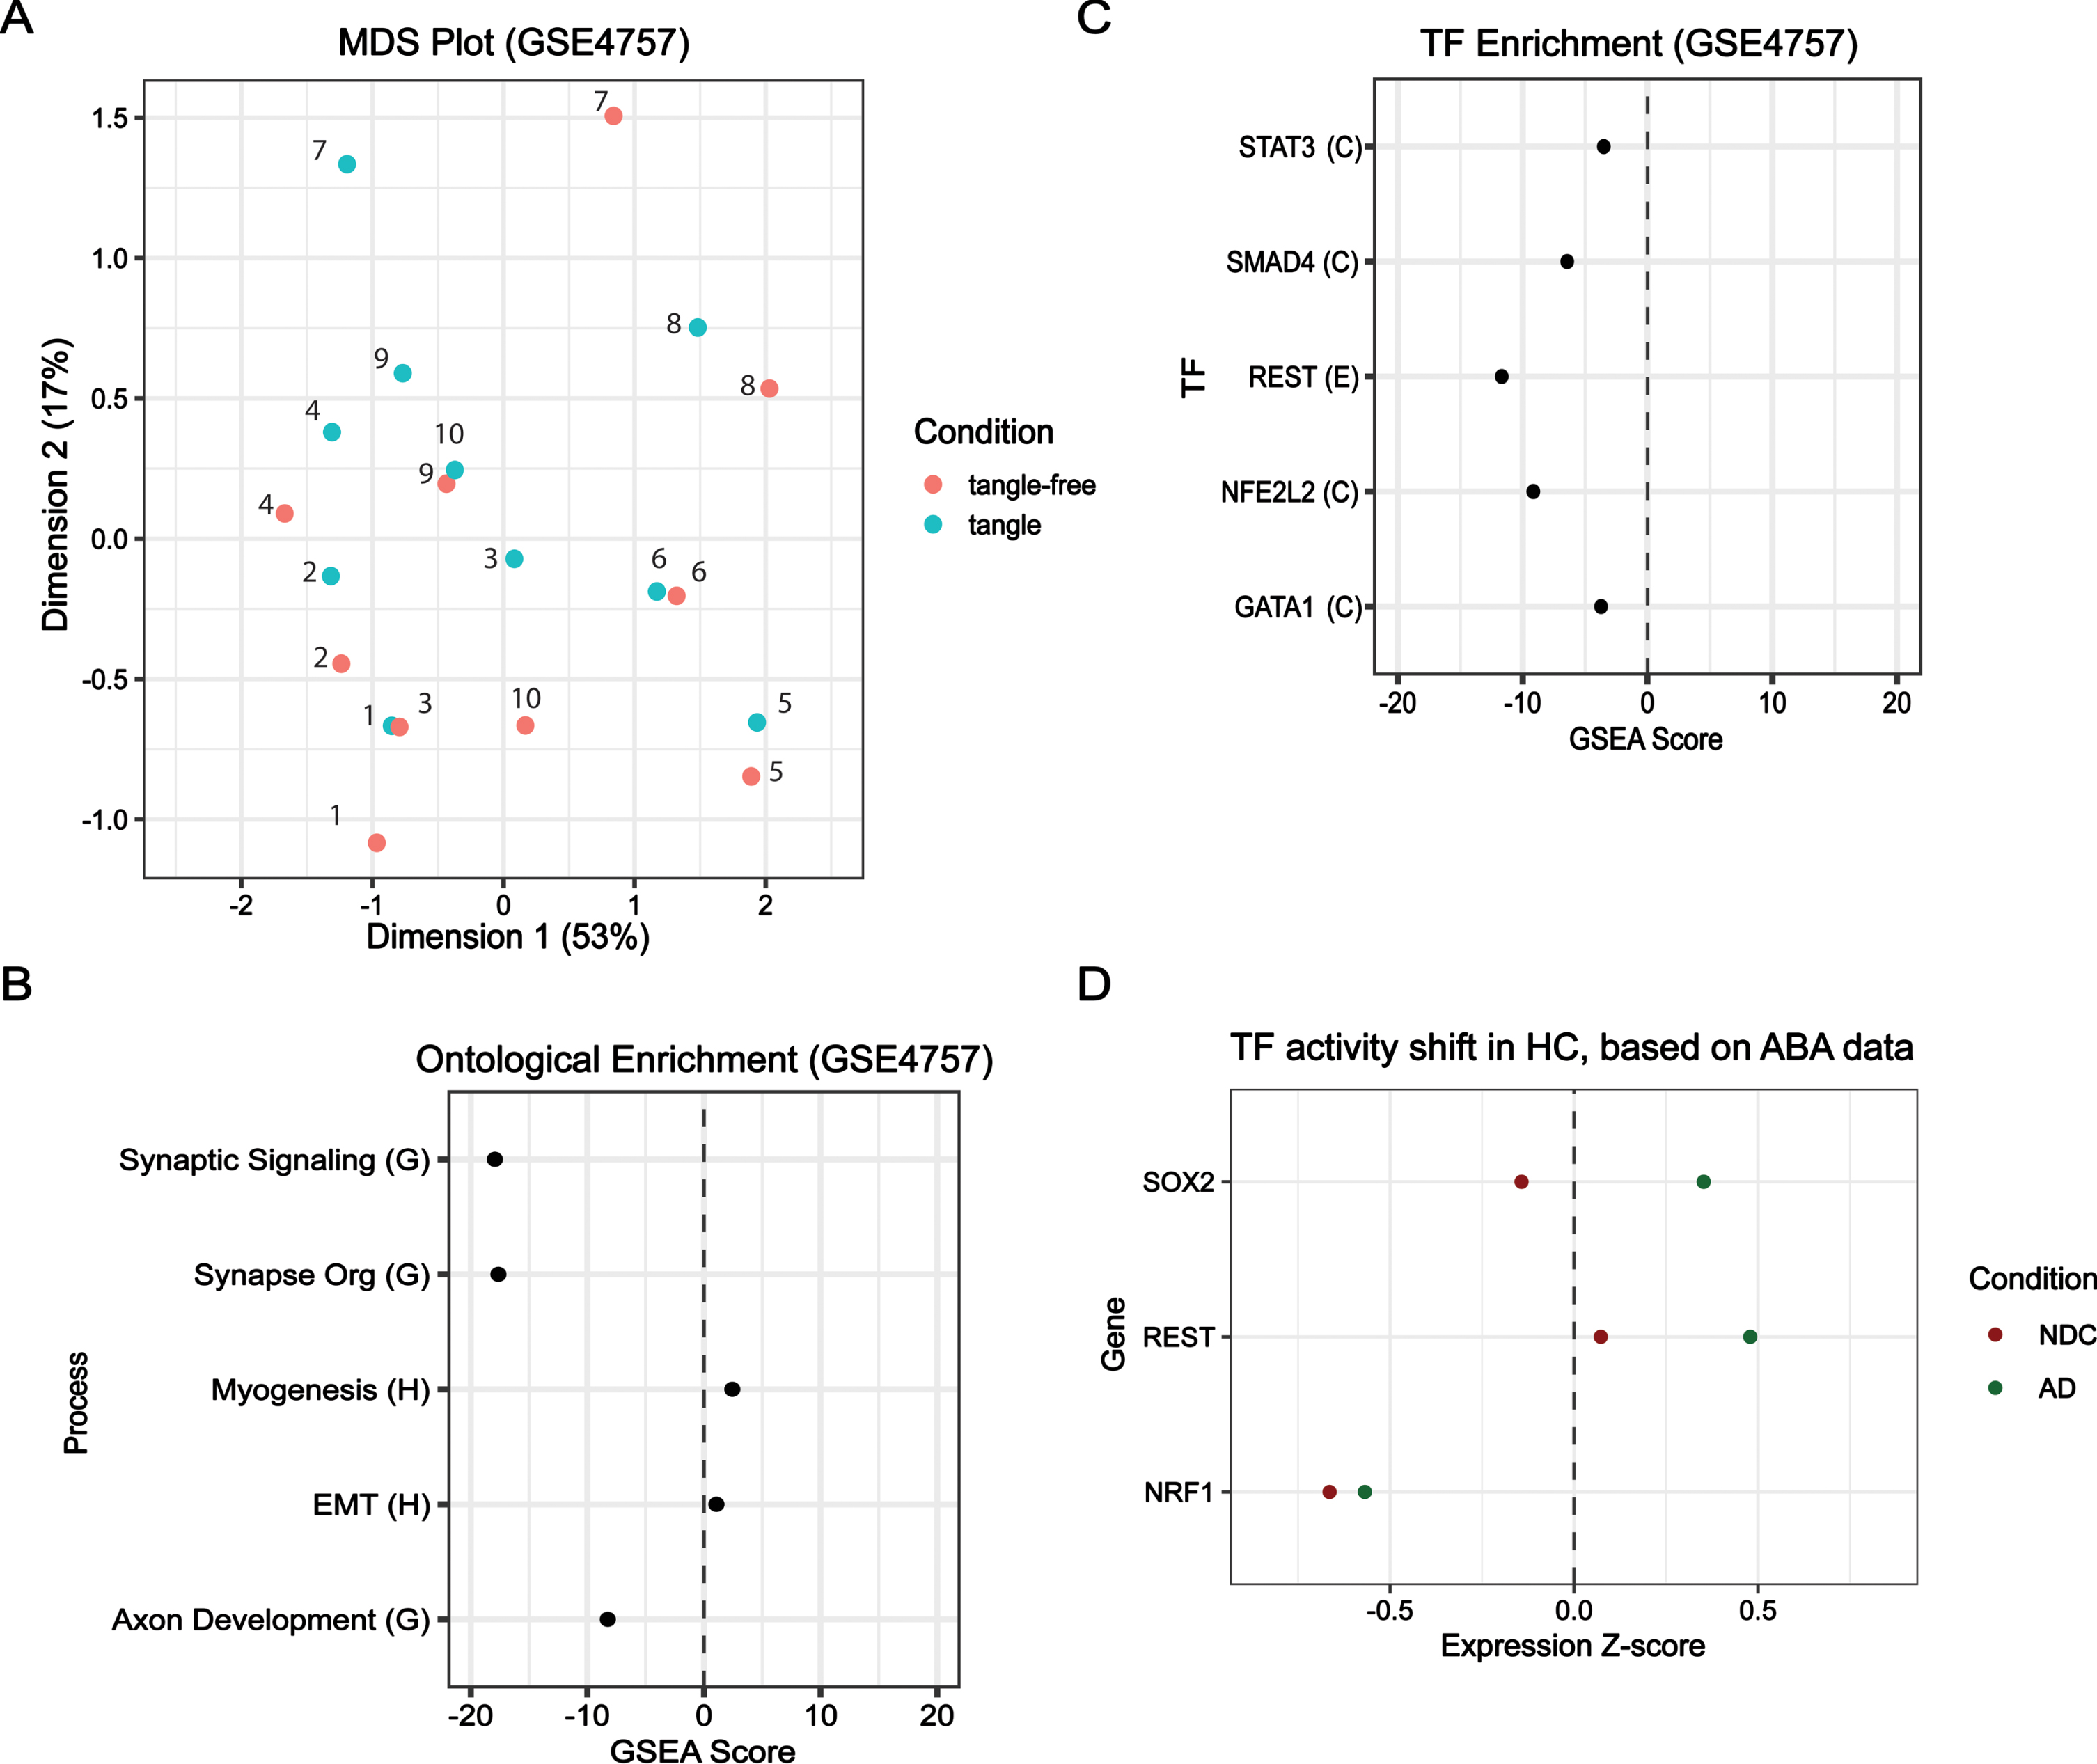 Comparison of key regulators in HC from AD, Demented, and Control samples. For GSE4757: (A) multidimension scaling (MDS) comparing tangle-free and tangle samples; (B) ontological enrichment using GOBP library; and (C) TF-target enrichment using the ECC library. For Allen Brain Atlas samples: (D) hippocampus (HC) z-score expression values from Allen Brain Atlas’ ADT data for NRF1, REST, and SOX2 are plotted for two conditions (1) Non-demented control (NDC) (Braak I-II) and (2) probable AD samples (AD) (Braak III-VI). Traumatic brain injury samples were excluded for all conditions assessed.